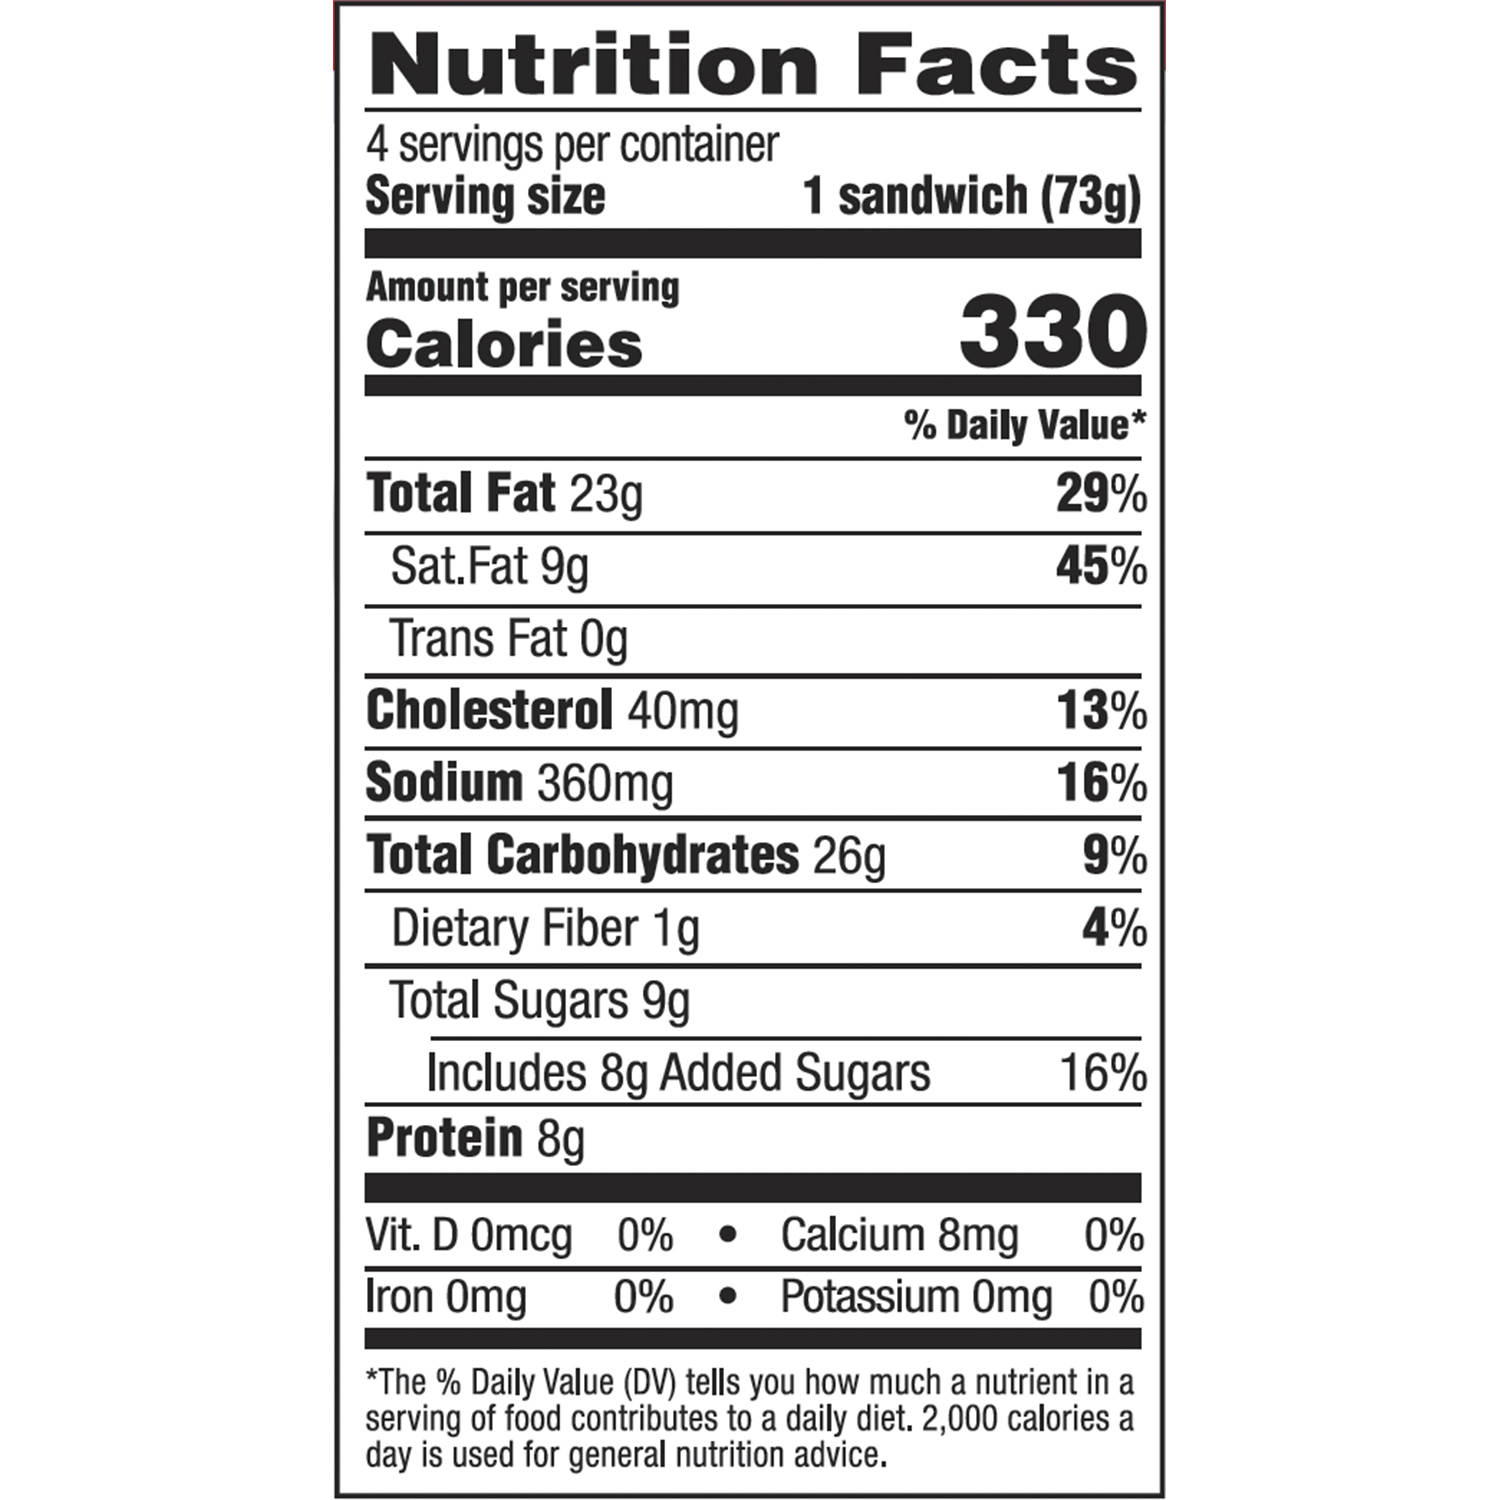 Nutrition Facts for Swaggerty's Sausage Waffle Sandwiches